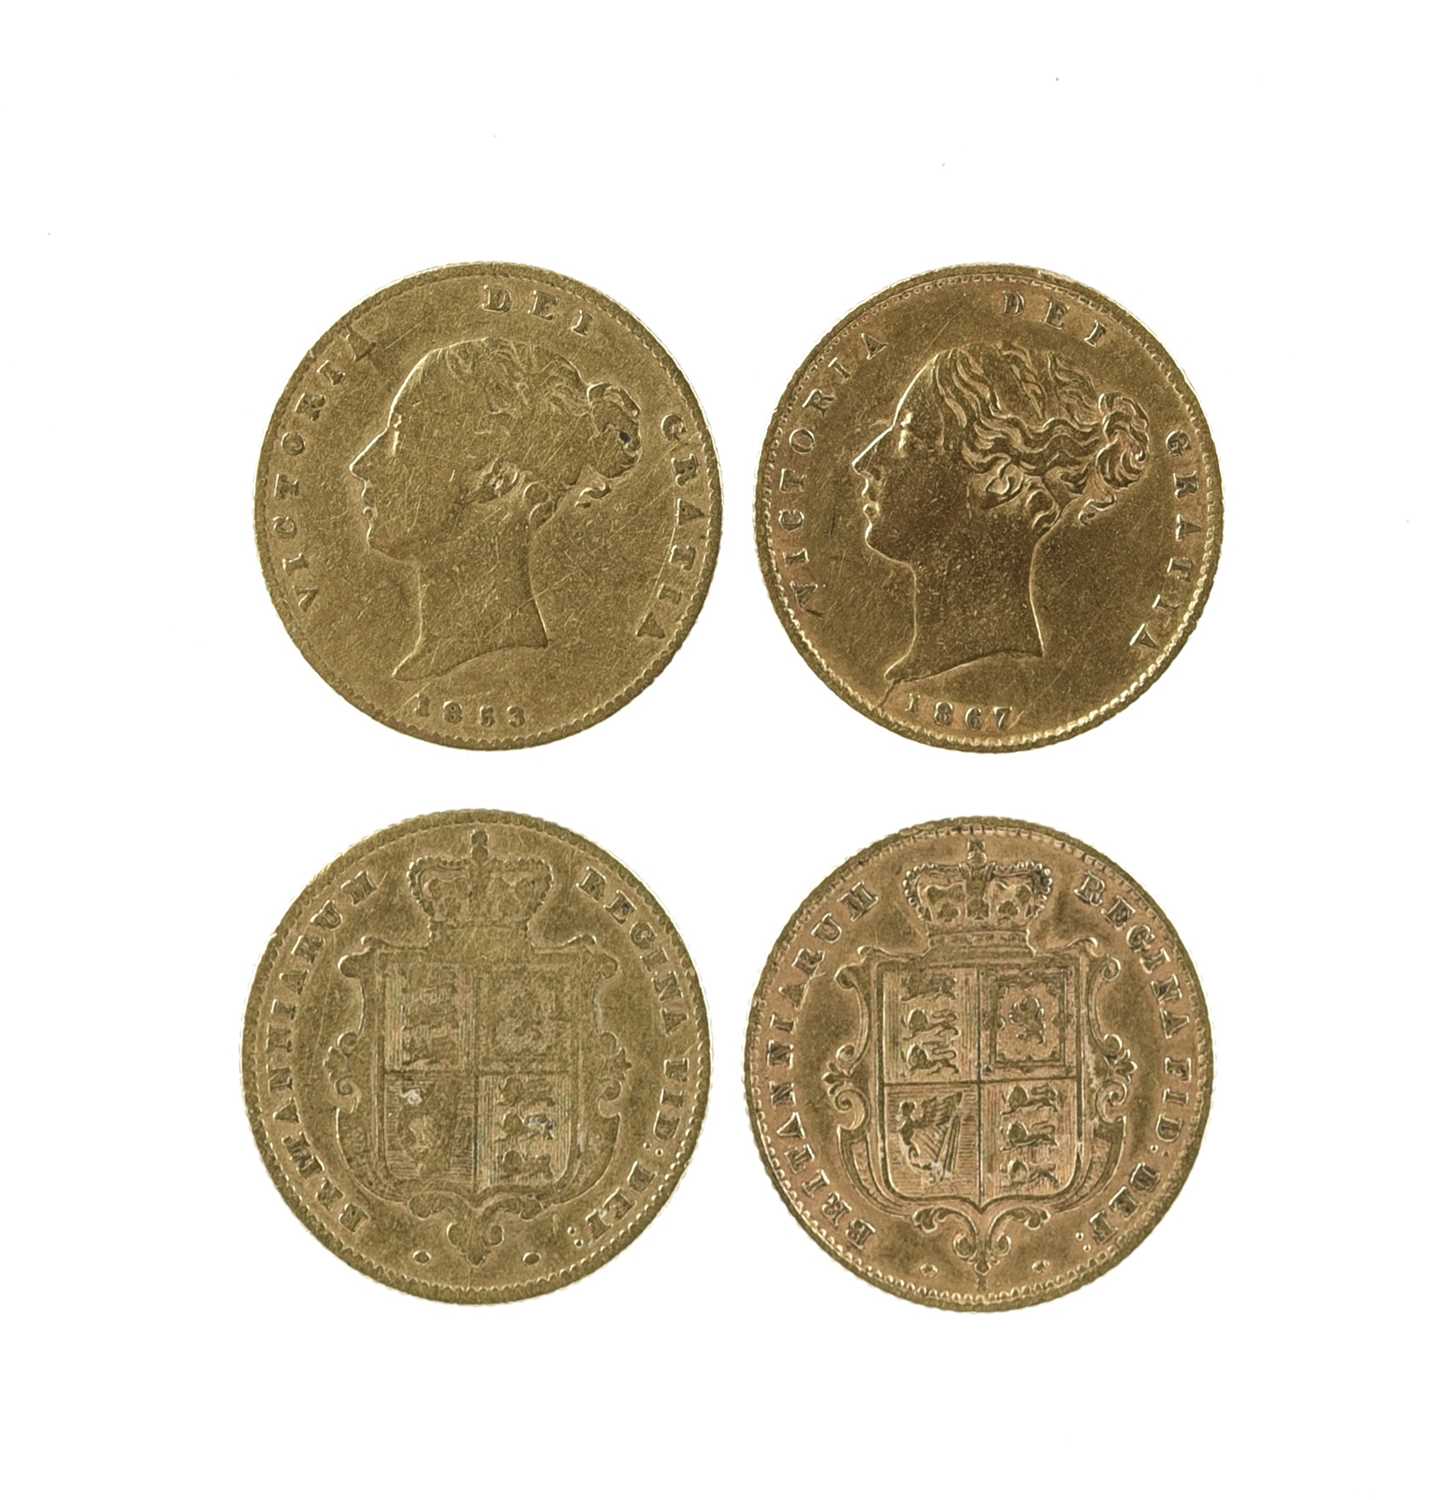 Victoria, half sovereigns (2), 1853 and 1867 (S 3859 and 3860), the first good fair, the second near